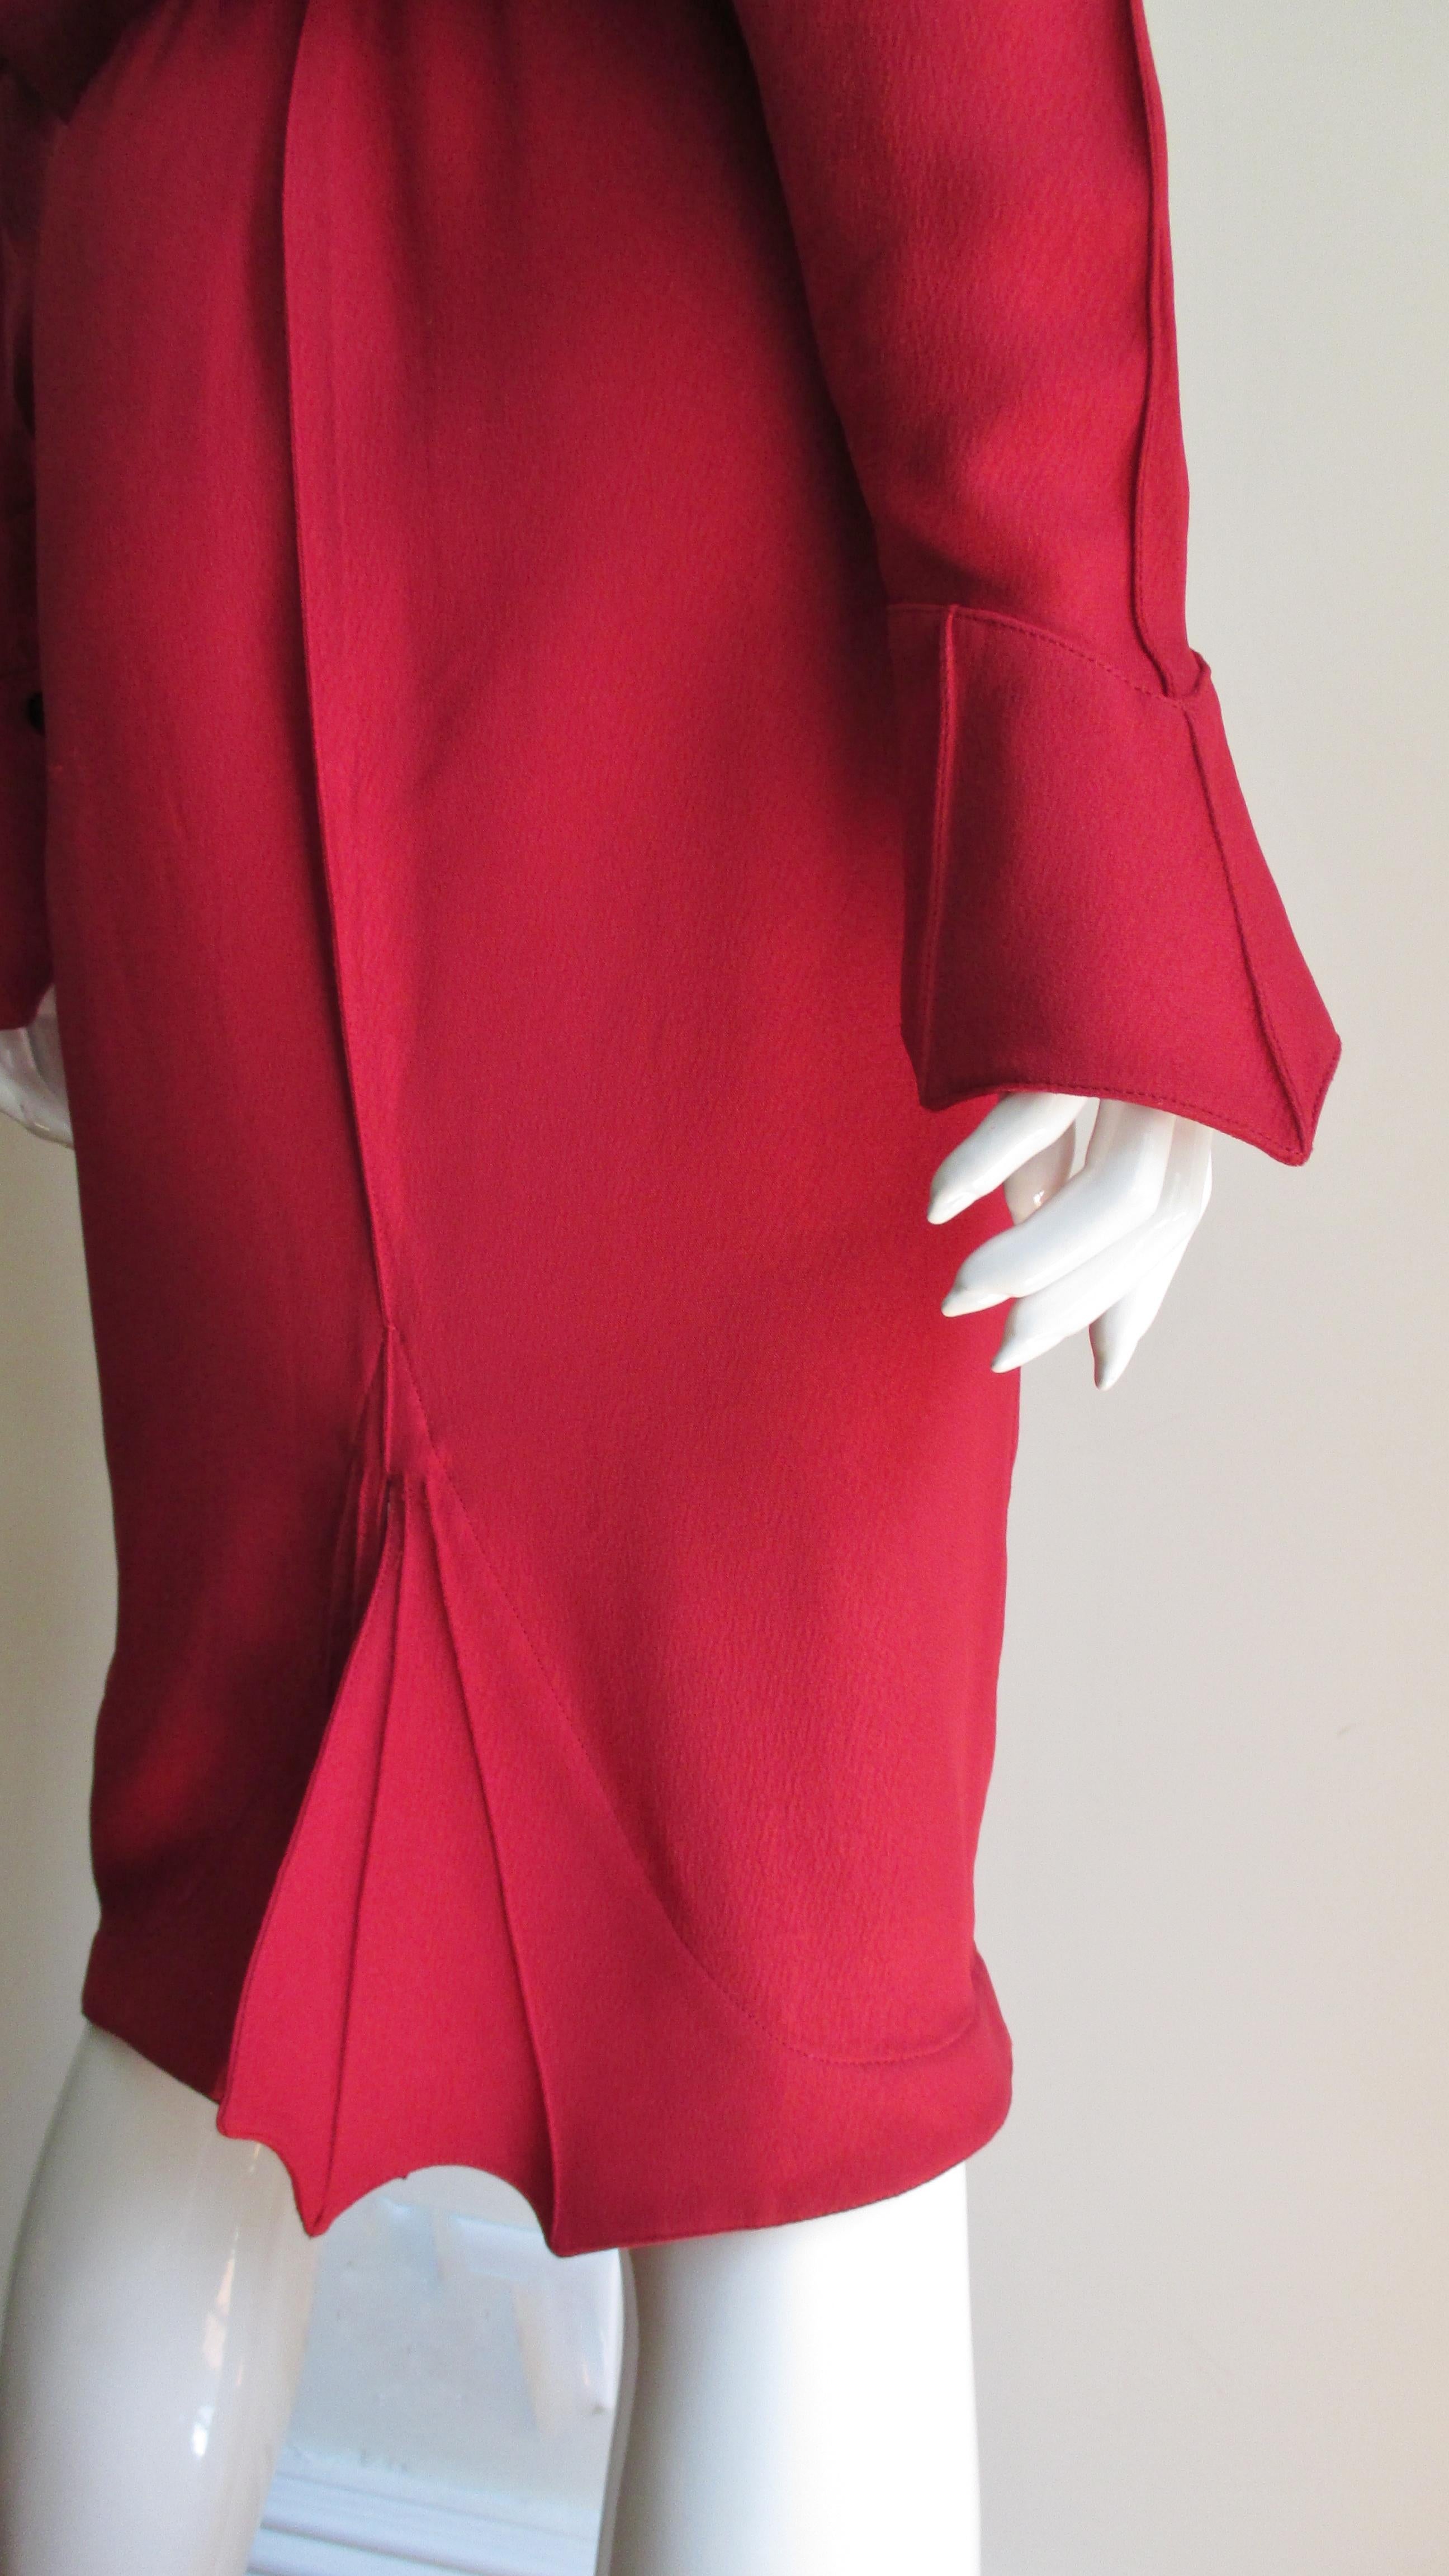 Thierry Mugler Dress with Pointed Collar and Cuffs 1980s For Sale 9